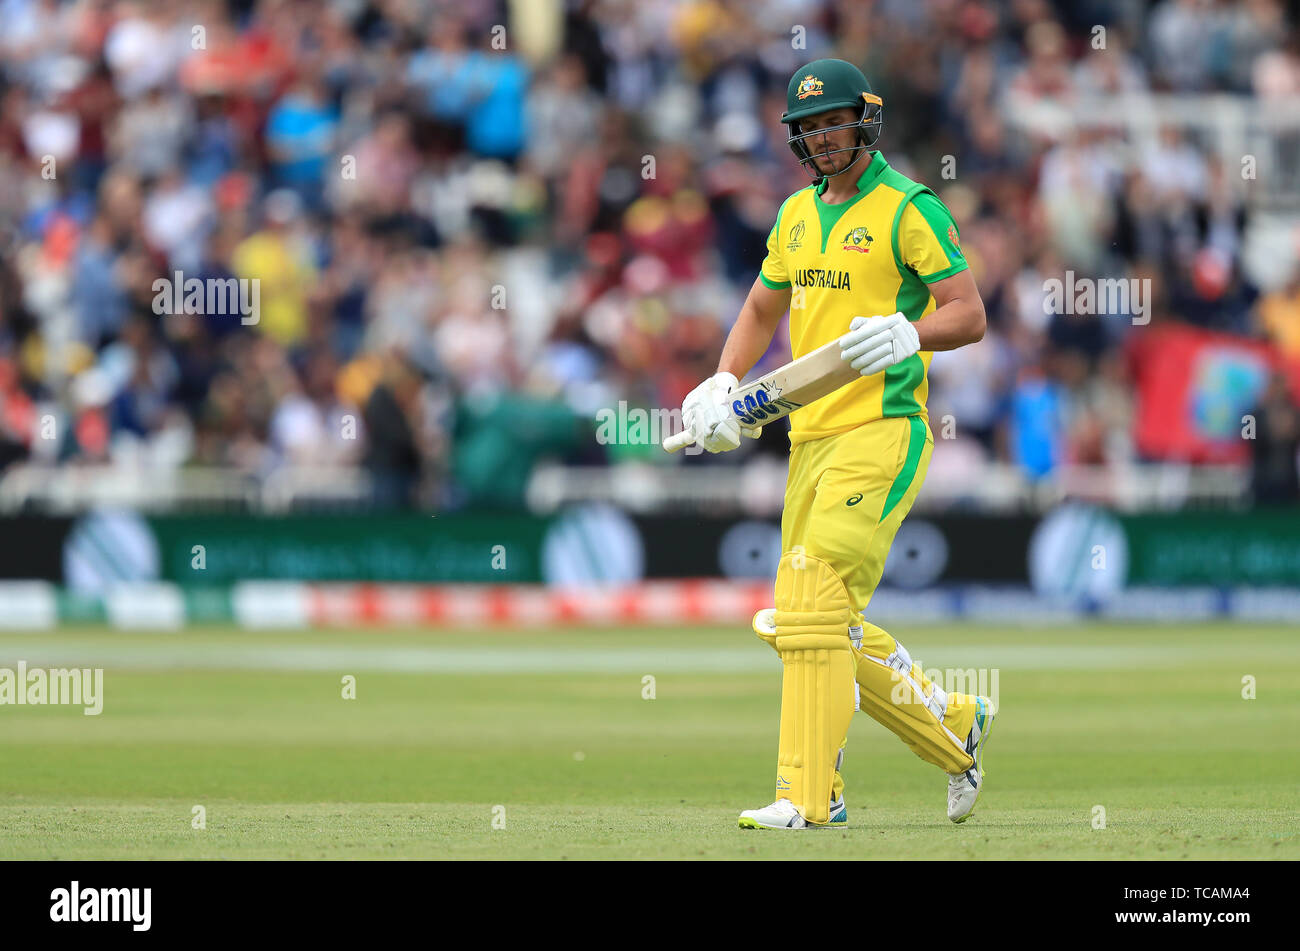 Australia's Nathan Coulter-Nile leaves the field after being dismissed during the ICC Cricket World Cup group stage match at Trent Bridge, Nottingham. Stock Photo